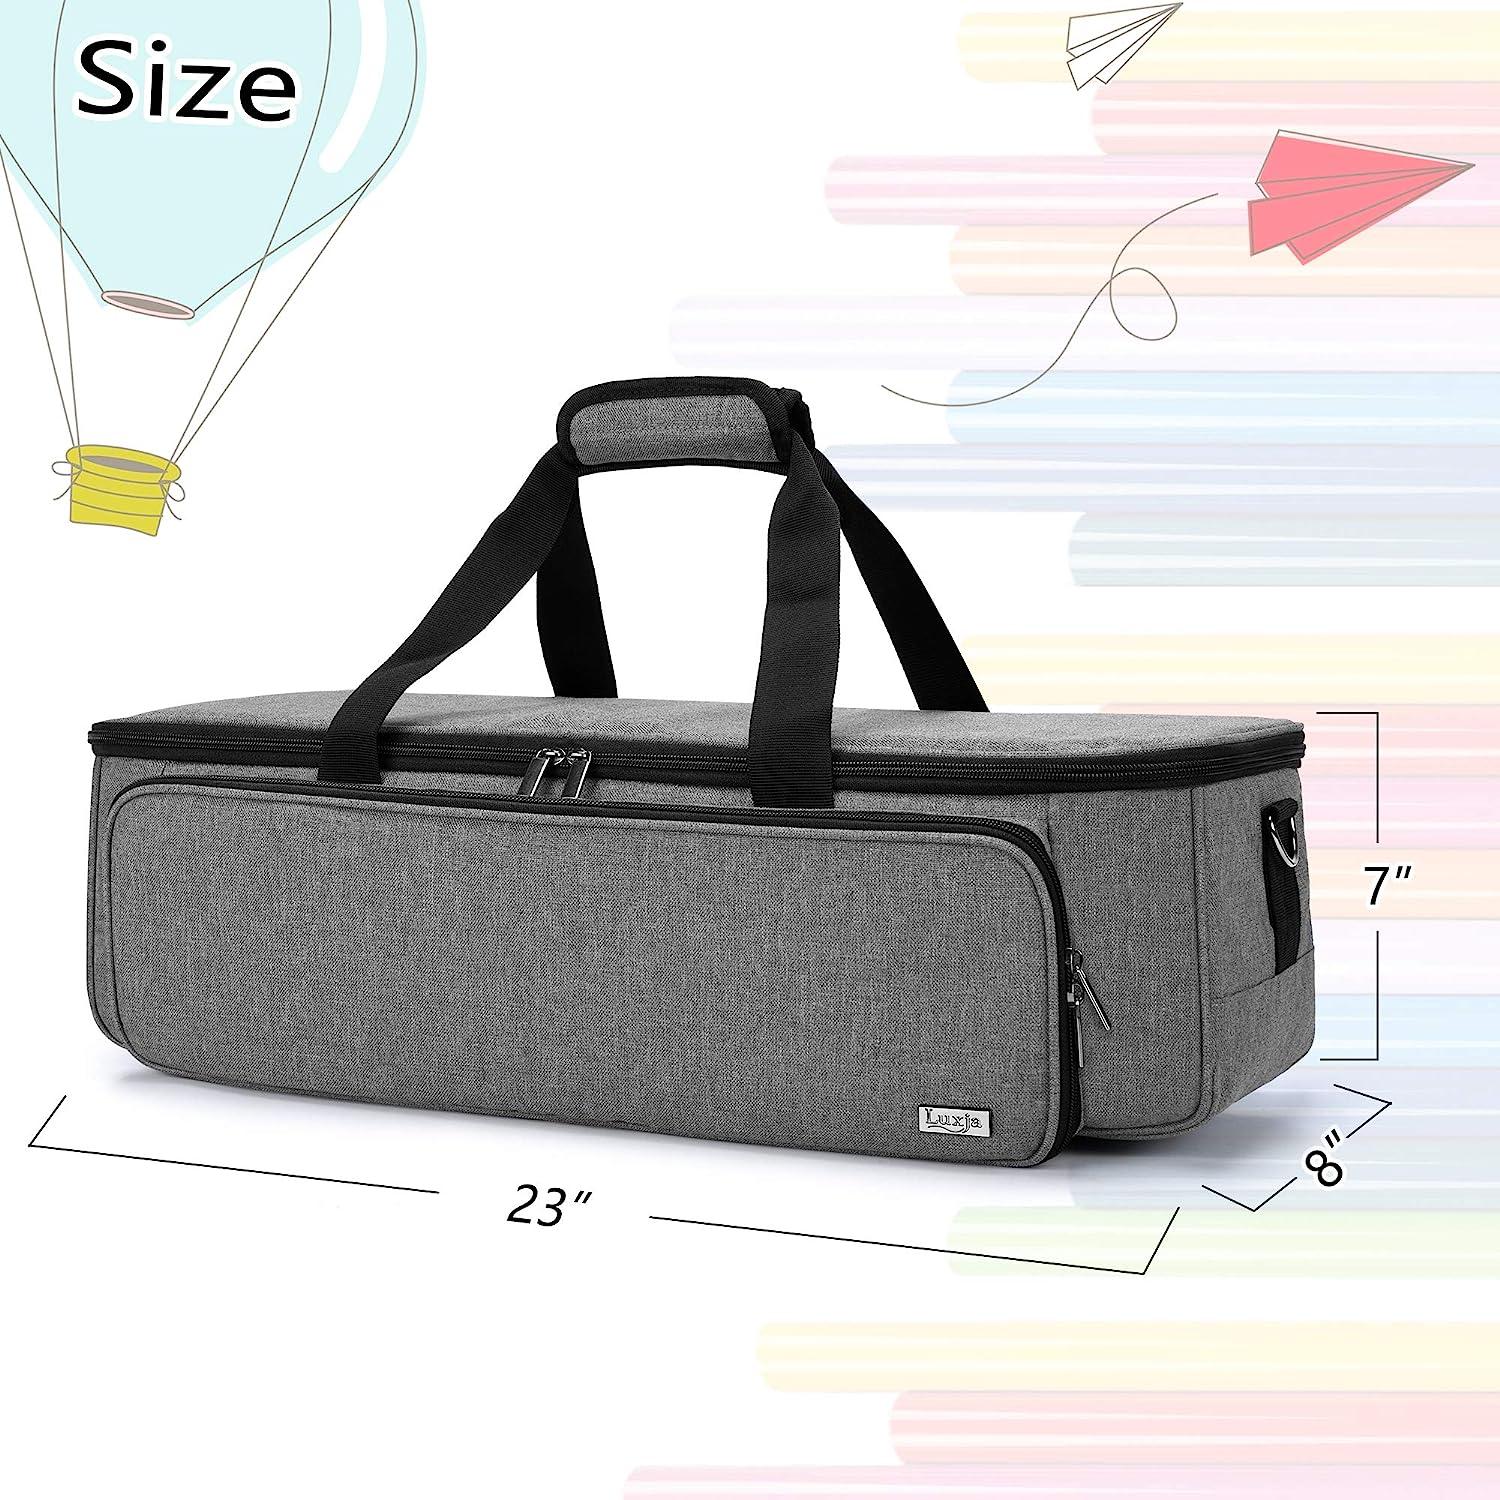 LUXJA Carrying Bag Compatible with Cricut Explore Air and Maker, Tote Bag  Compatible with Cricut Explore Air, Silhouette Cameo 4 and Supplies (Bag